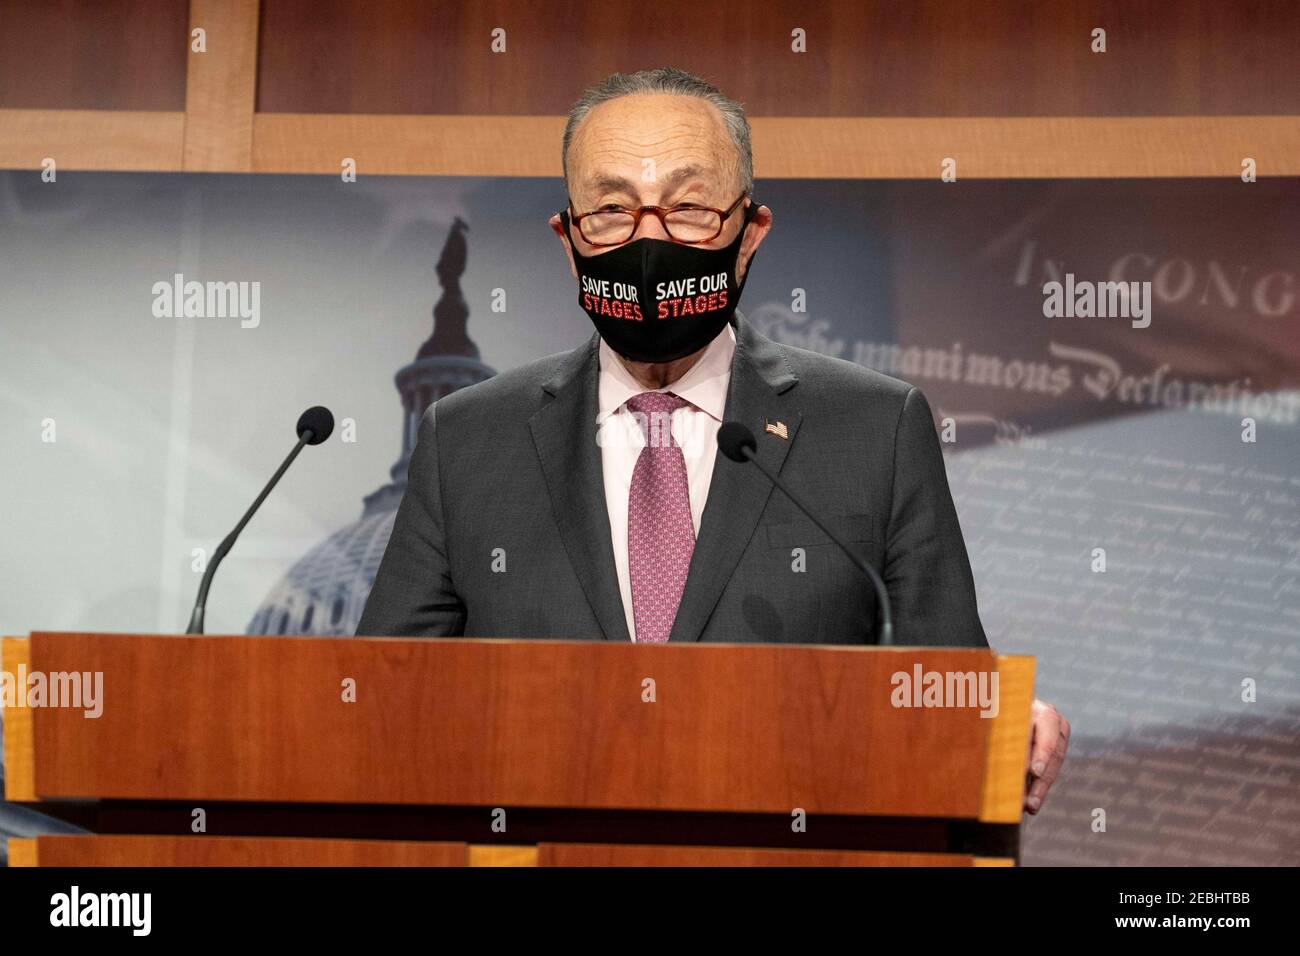 U.S. Senate Majority Leader Chuck Schumer of New York, during a press conference to outline the Democrats COVID relief program at the U.S. Capitol February 11, 2021 in Washington, D.C. Stock Photo